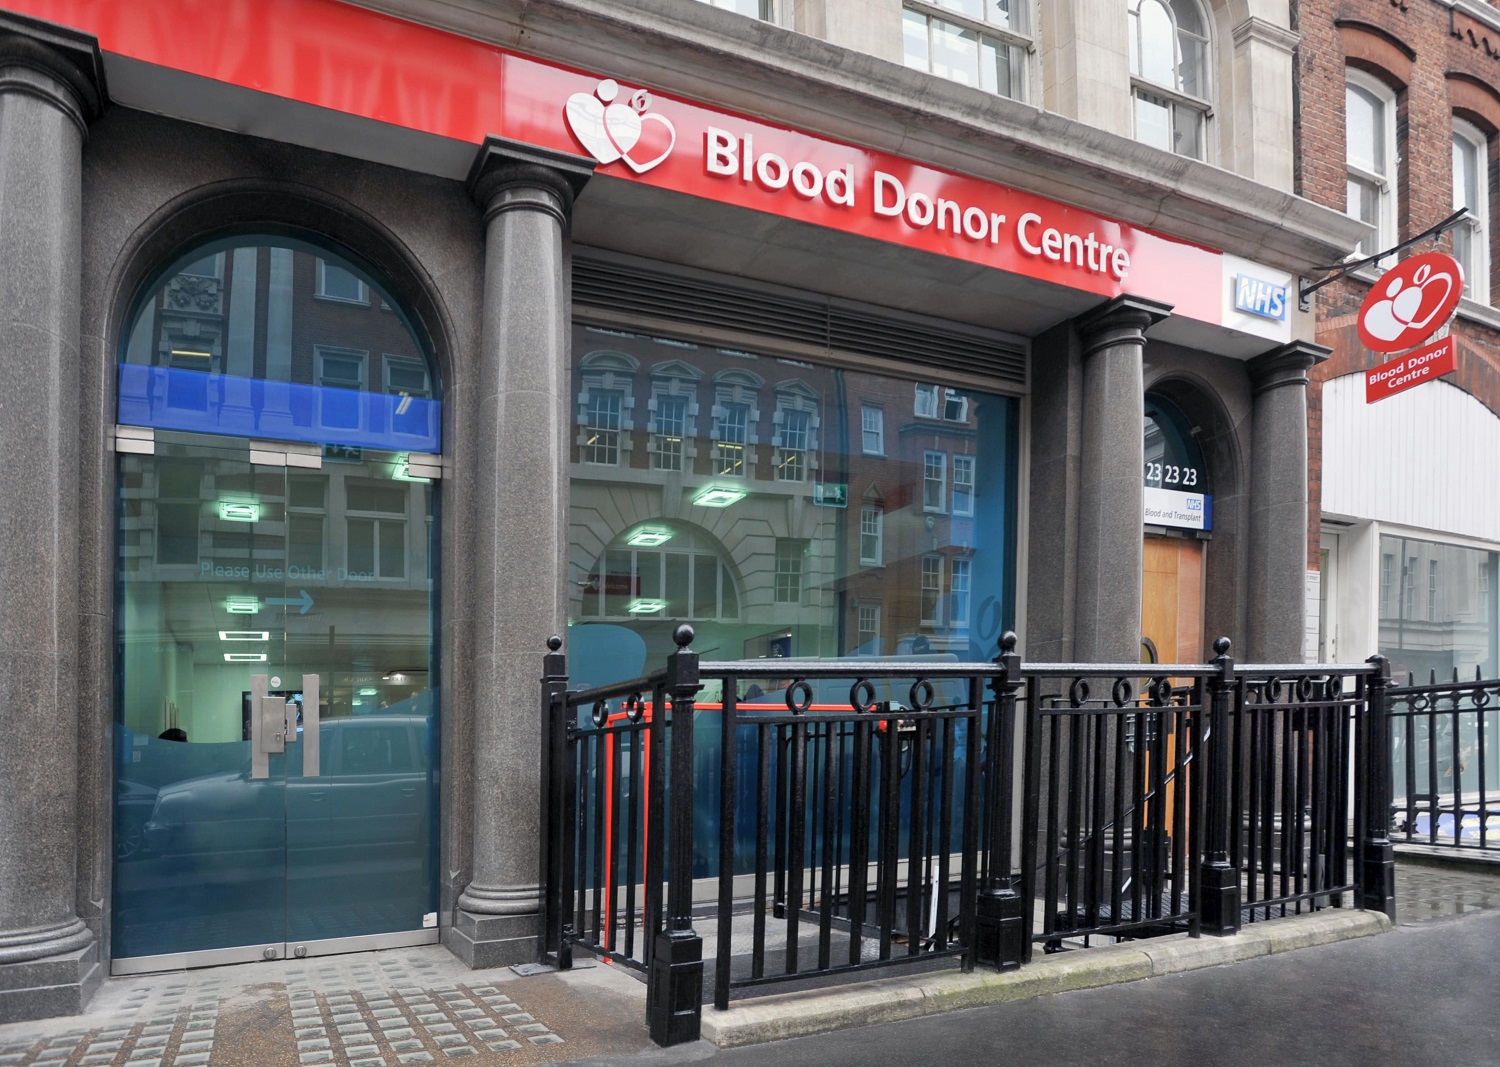 West End Donor Centre front